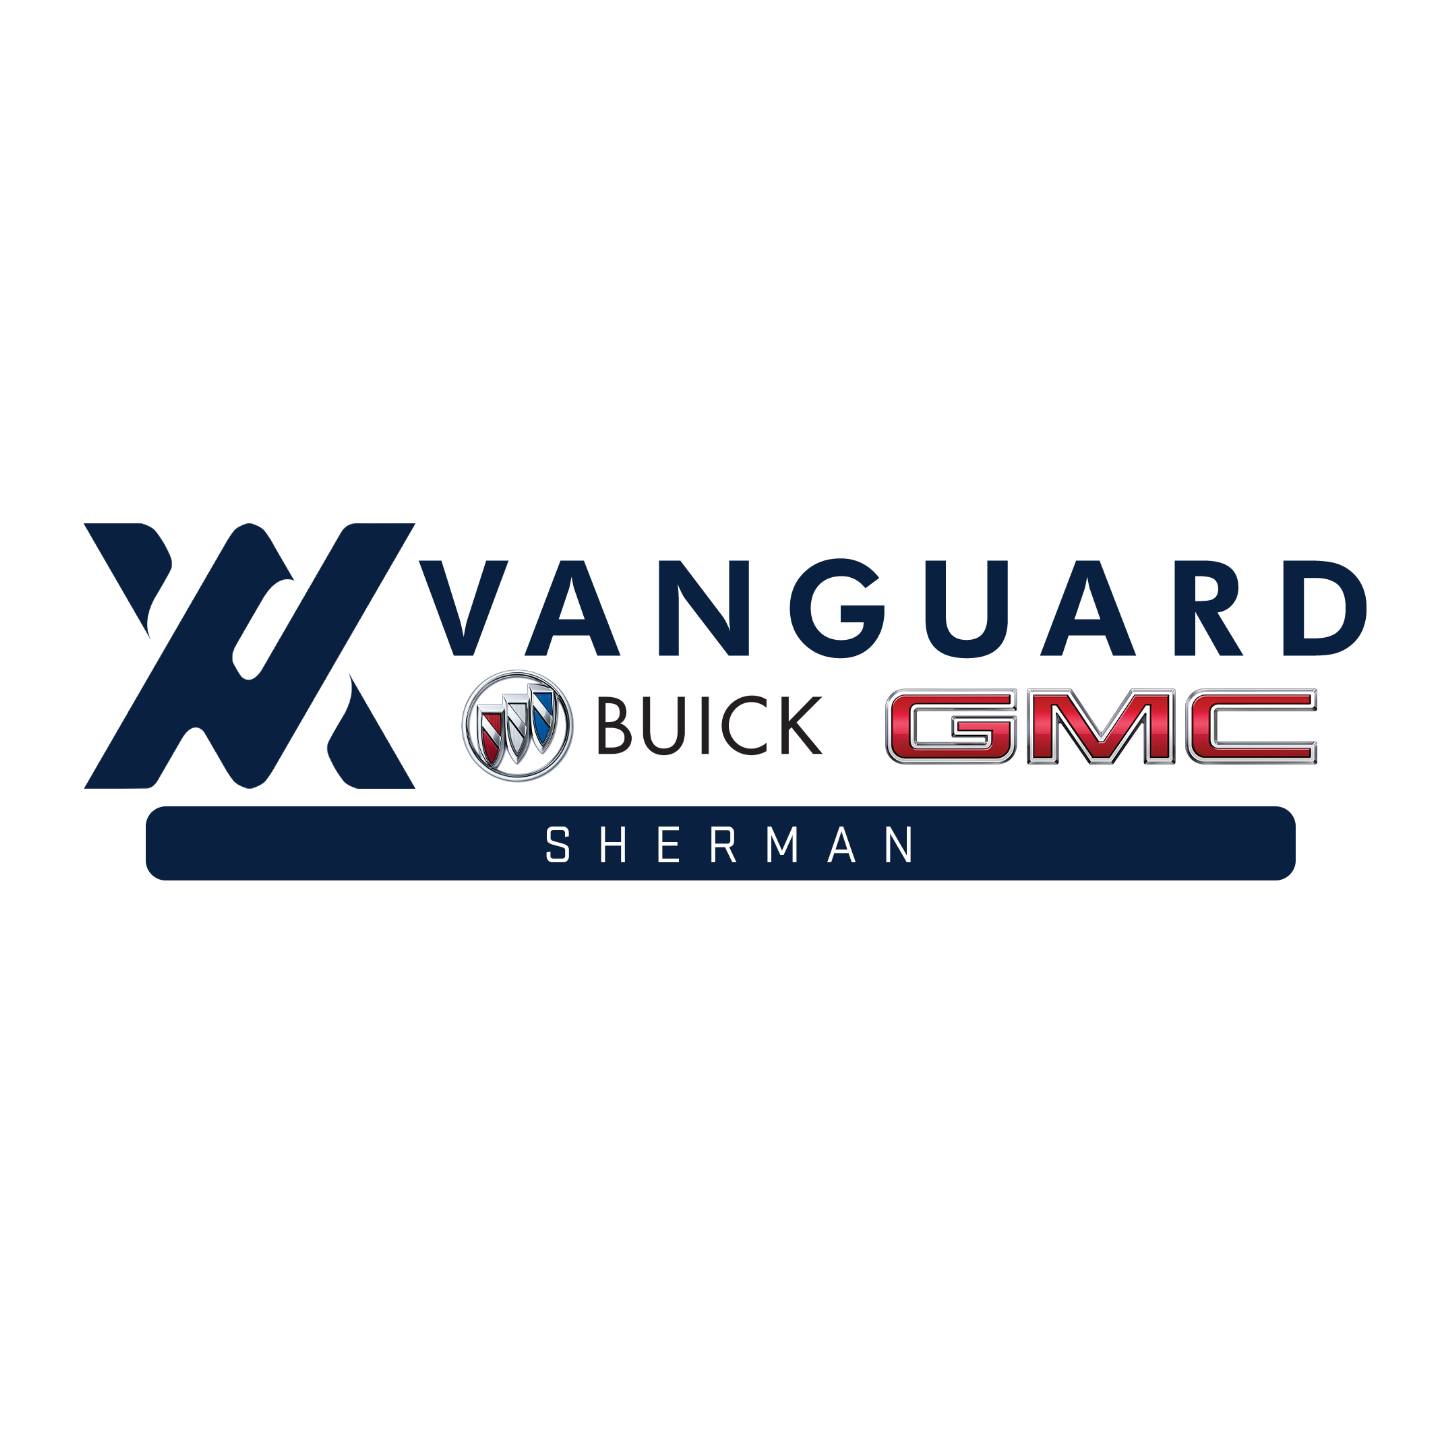 <h1 class="tribe-events-single-event-title">LIVE BROADCAST: Join Katy Country at Vanguard Buick GMC – 03/13/23 (3pm-6pm)</h1>